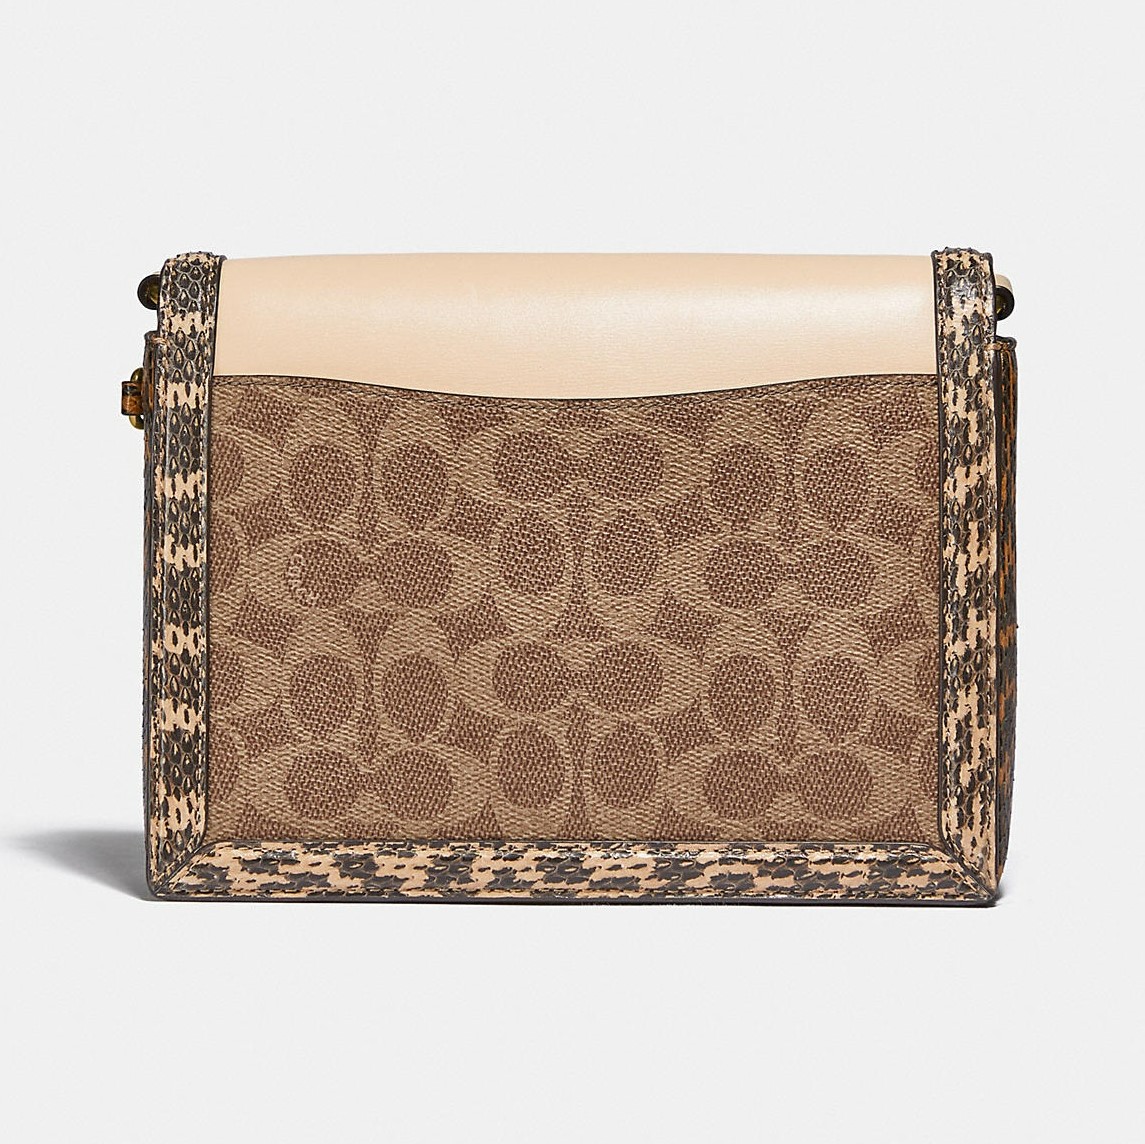 TÚI XÁCH NỮ COACH HUTTON SHOULDER BAG IN SIGNATURE CANVAS WITH SNAKESKIN DETAIL 2